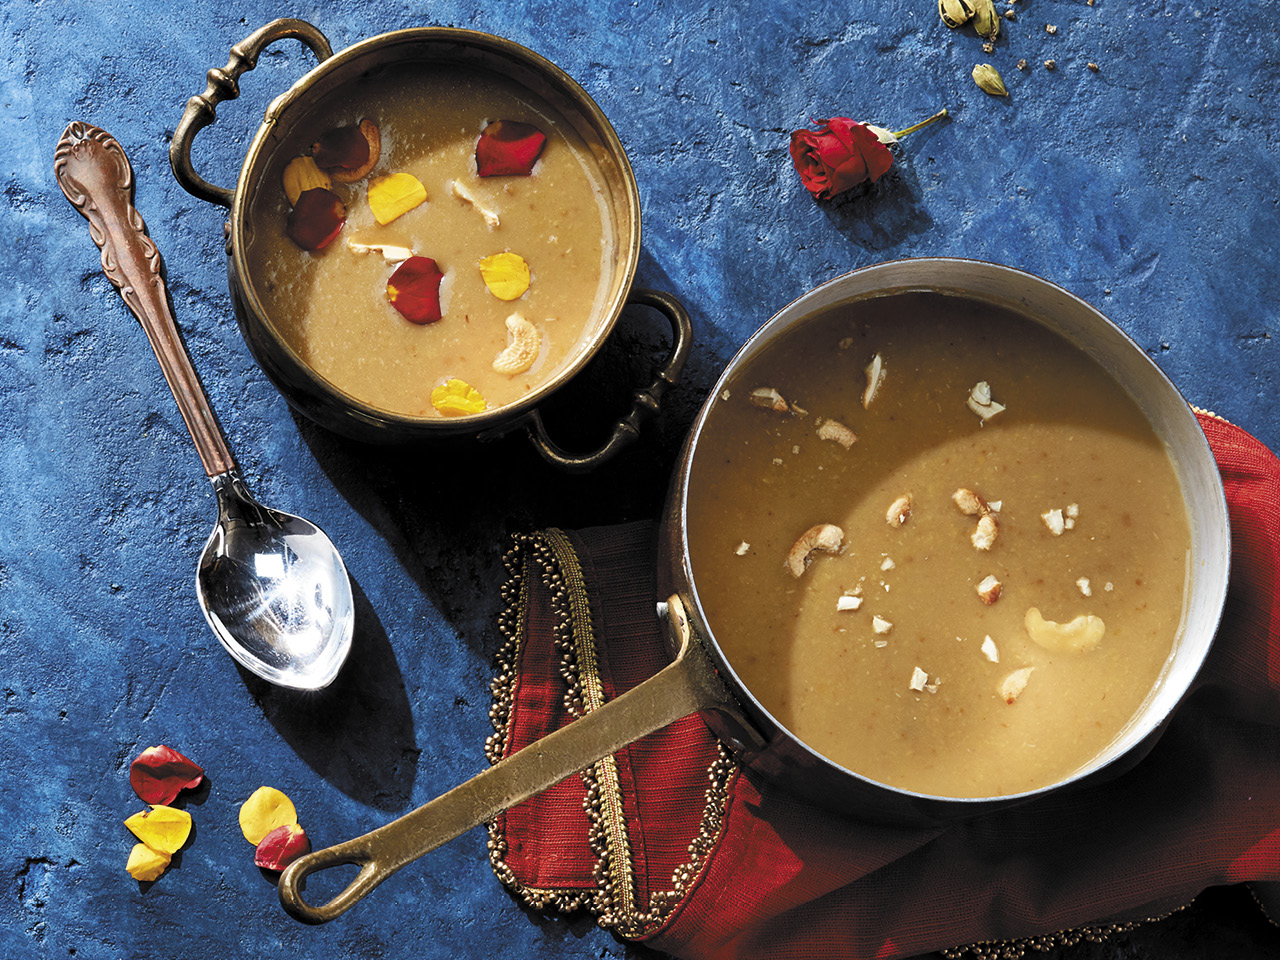 Paruppu Payasam (Sweet Moong Dal and Cashew Pudding with Cardamom and Jaggery)